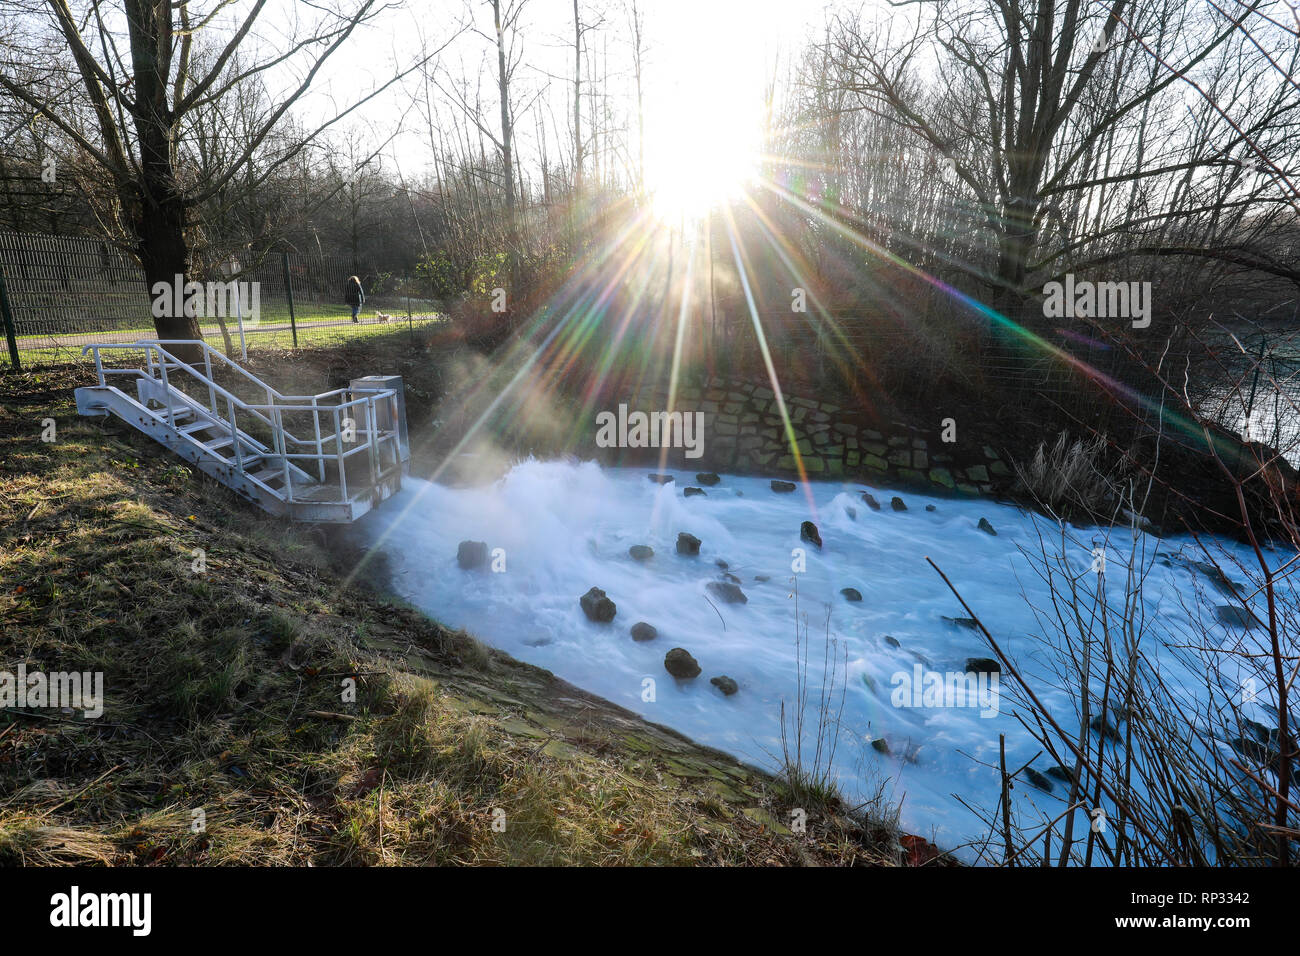 18.01.2019, Bochum, North Rhine-Westphalia, Germany - The mineral-rich shaft water from the disused Robert Mueser mine is discharged from a depth of 5 Stock Photo